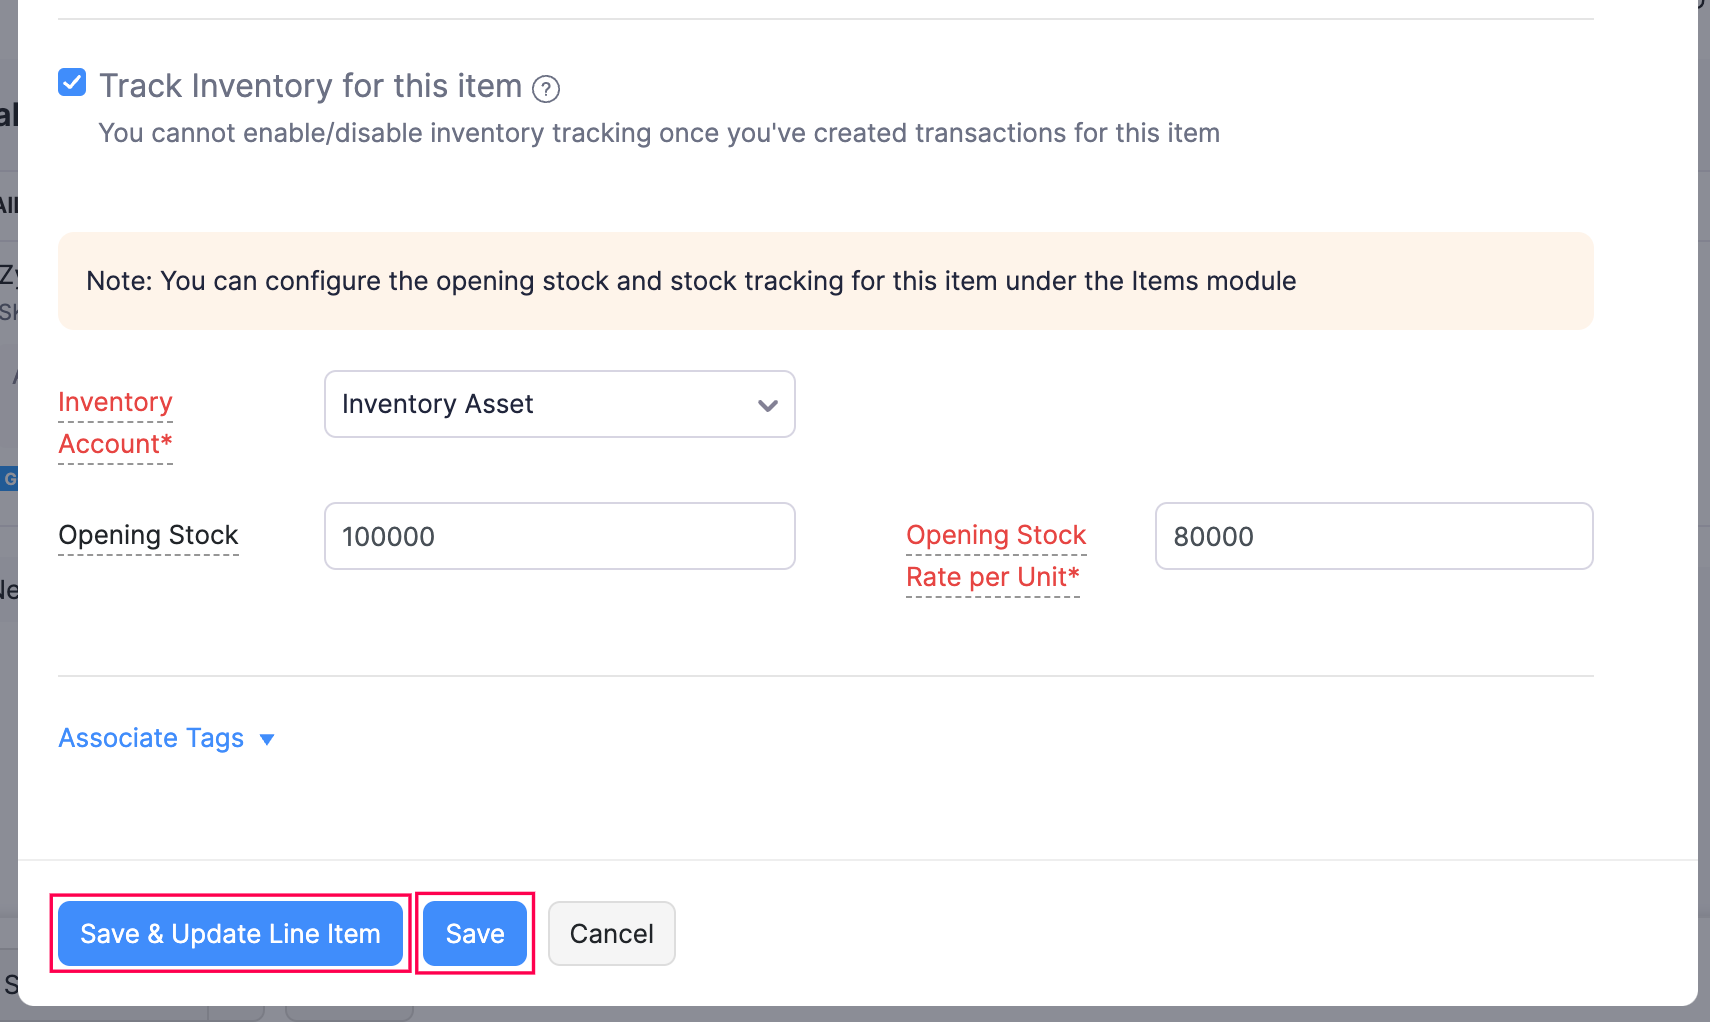 Save the item details that were edited from within a sales order in Zoho Books